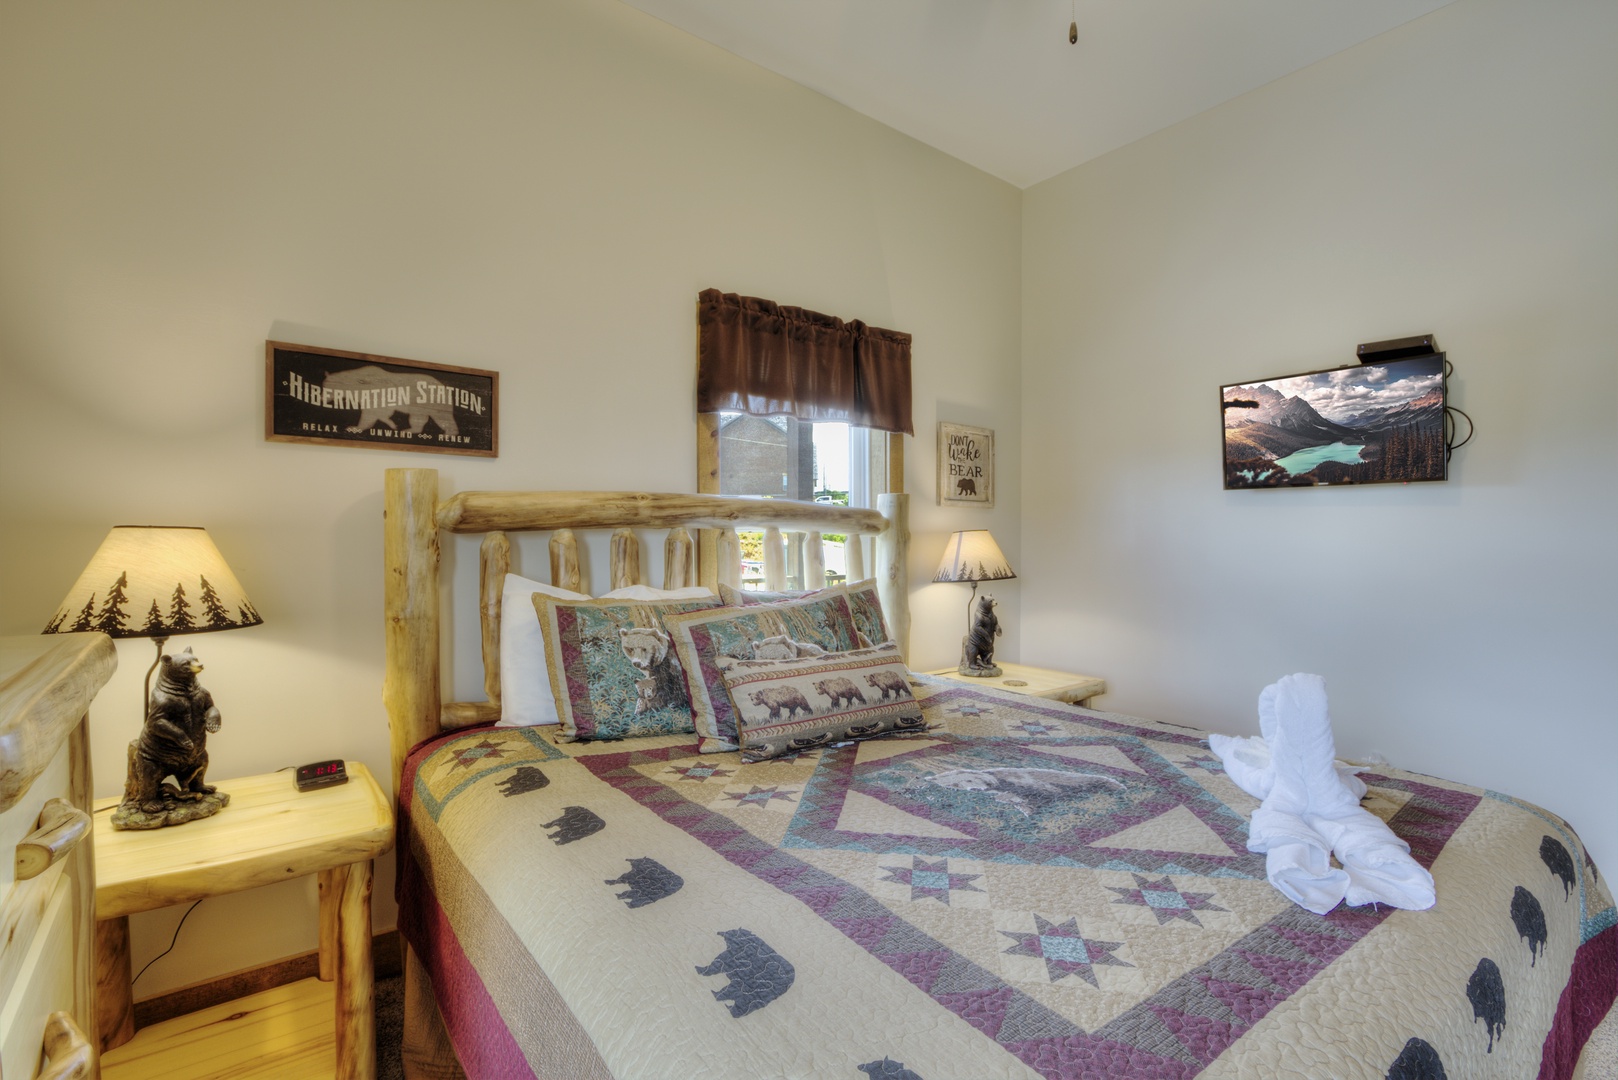 Flat screen, bedside tables, and bear lamp in bedroom at The Best View Lodge, a 5 bedroom cabin rental located in gatlinburg